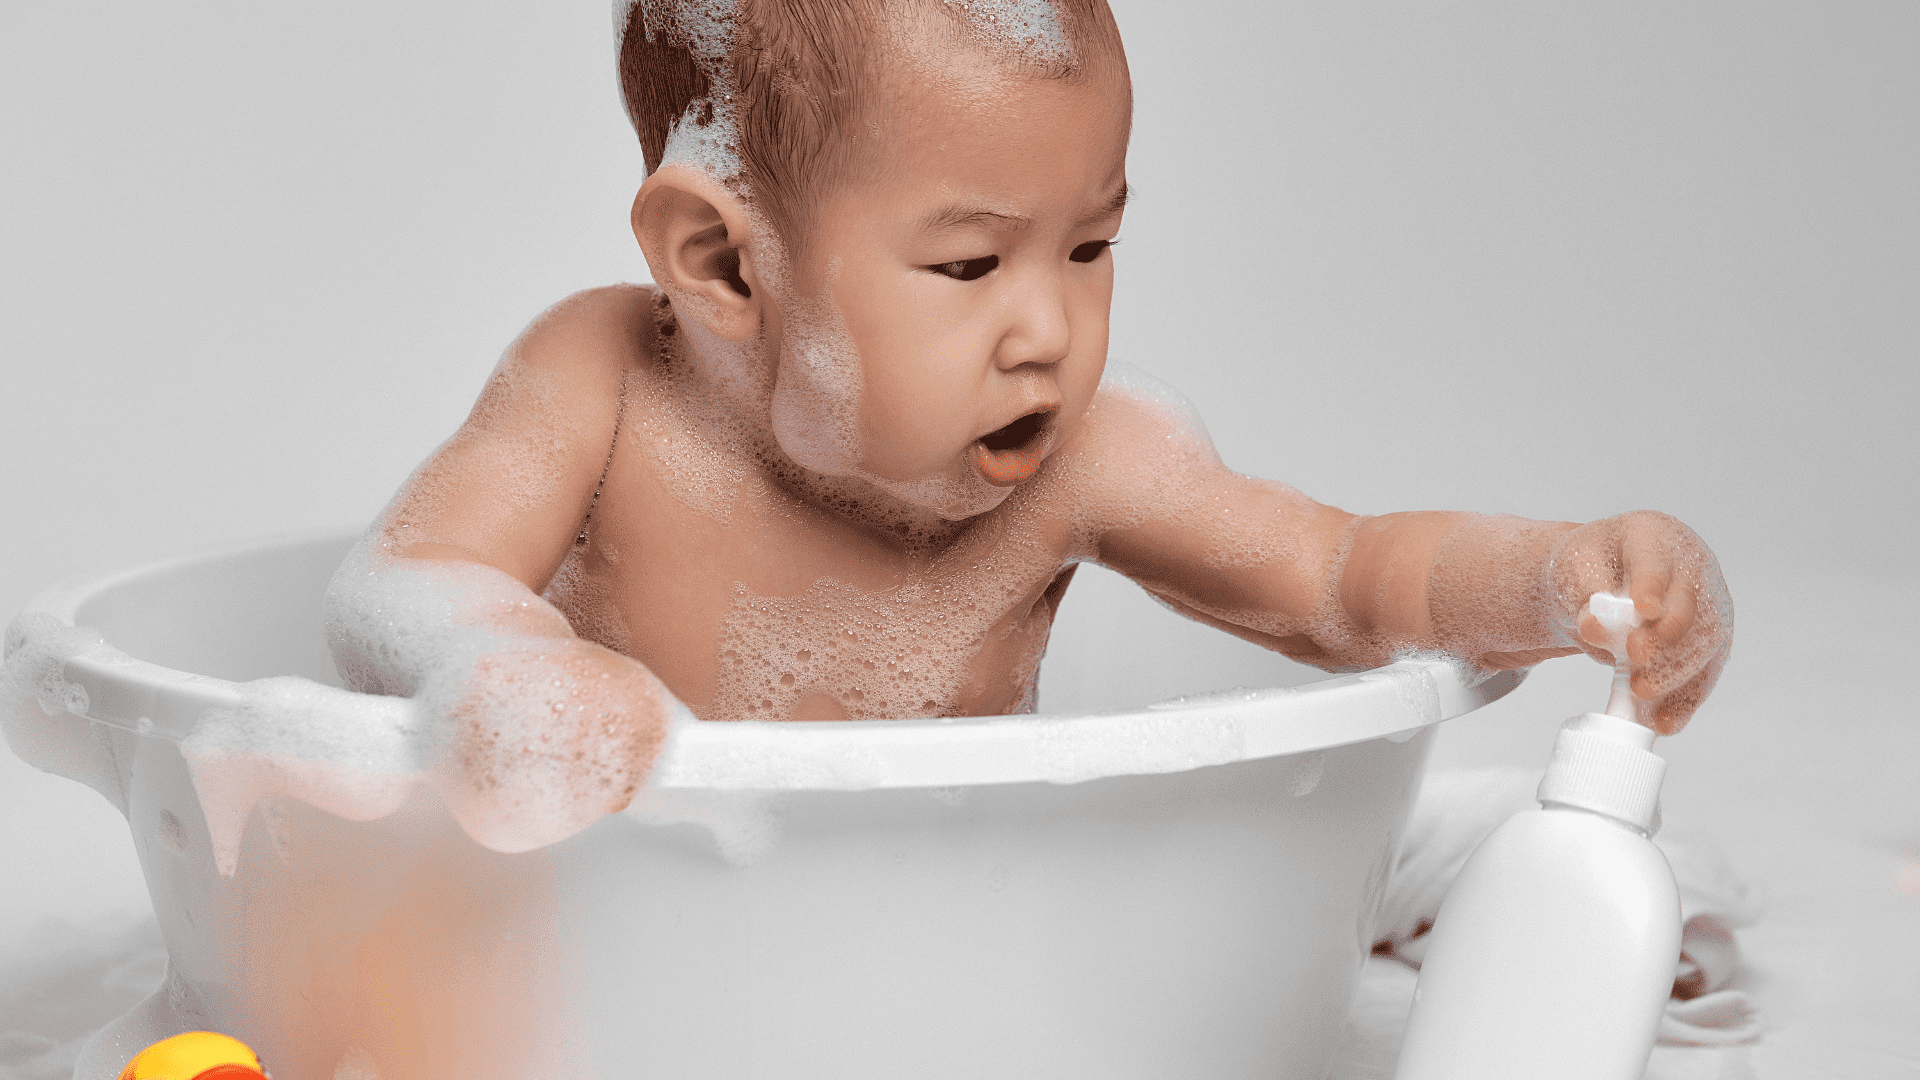 Baby-safe cleaning supplies